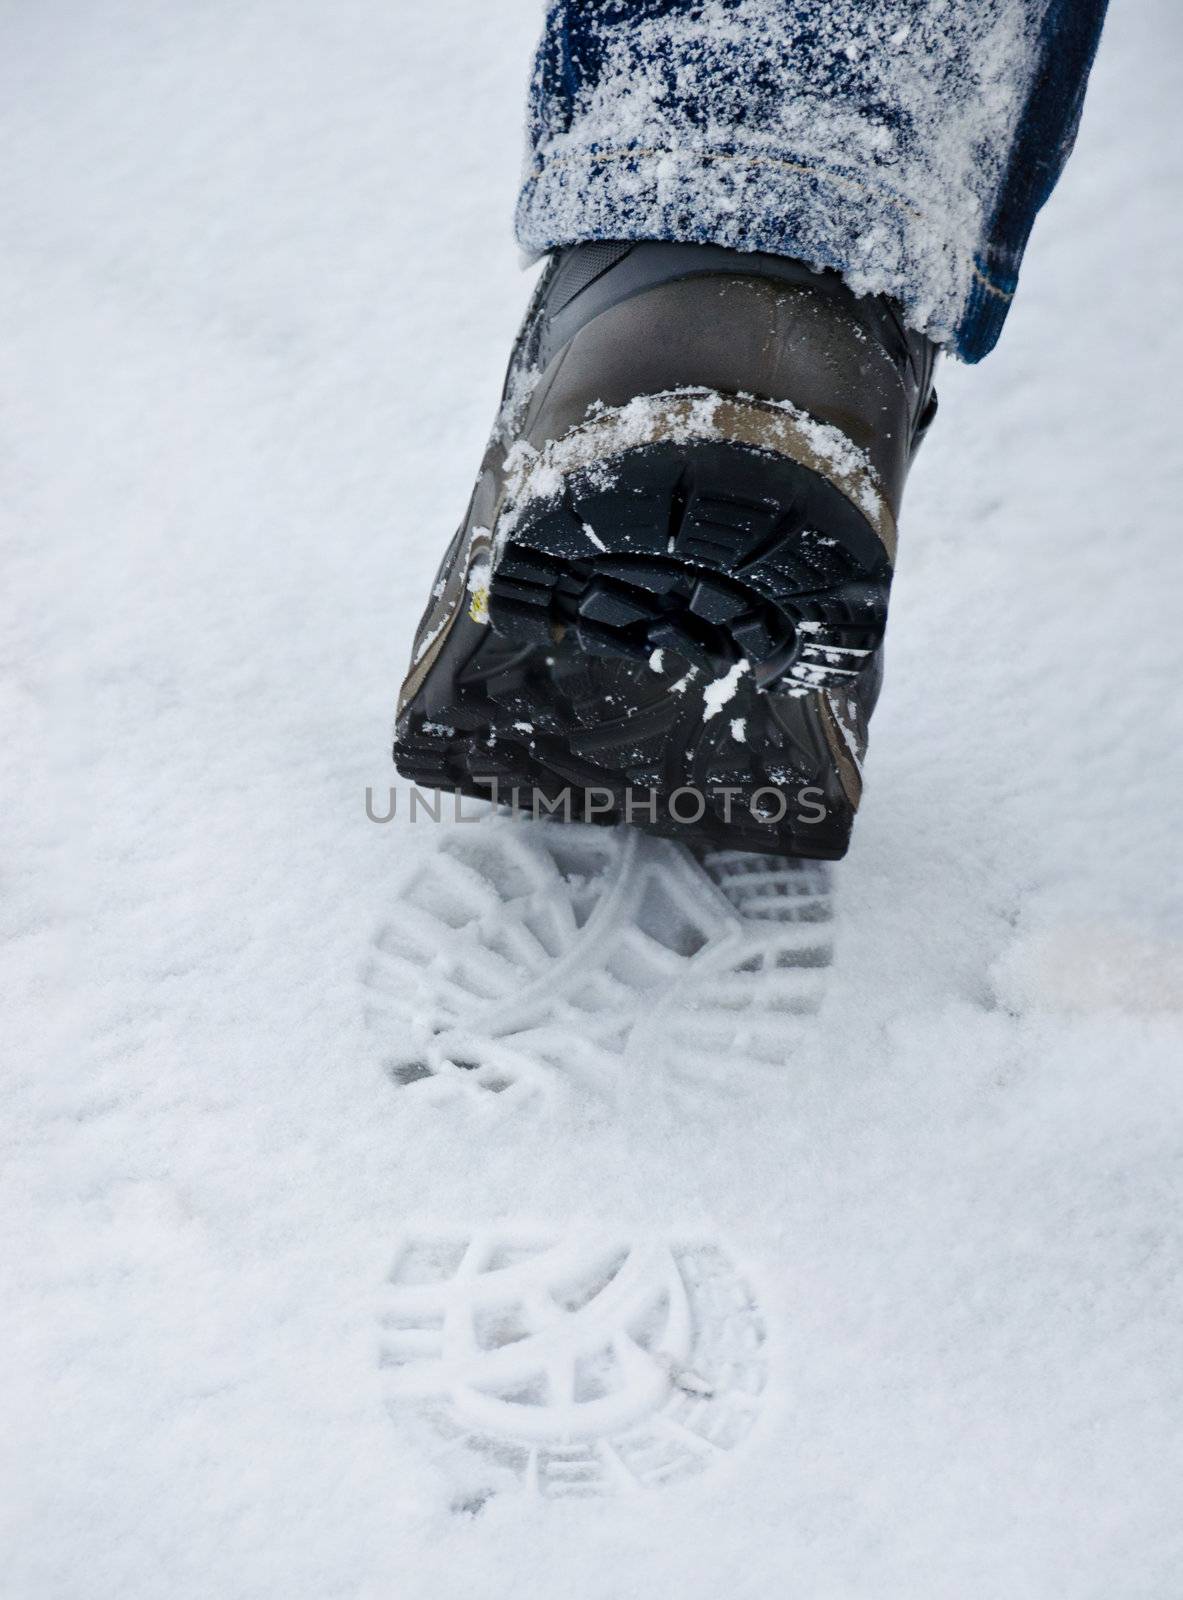 boots in the snow during a storm